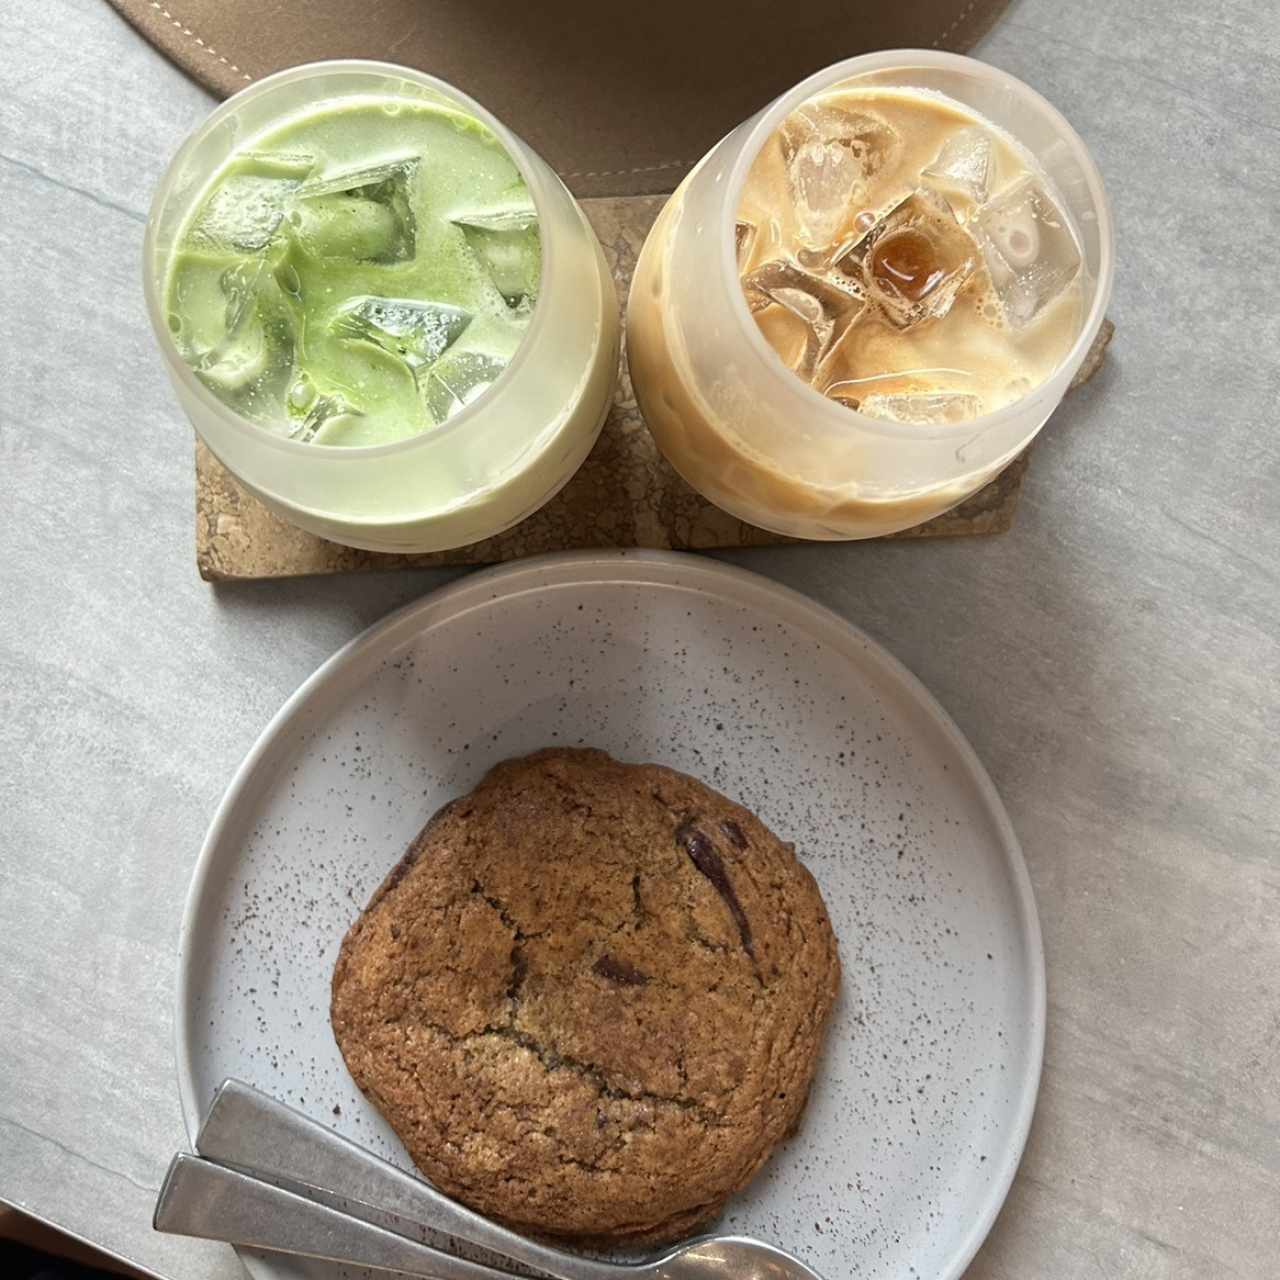 Matcha latte, chocolate chip cookies and Latte